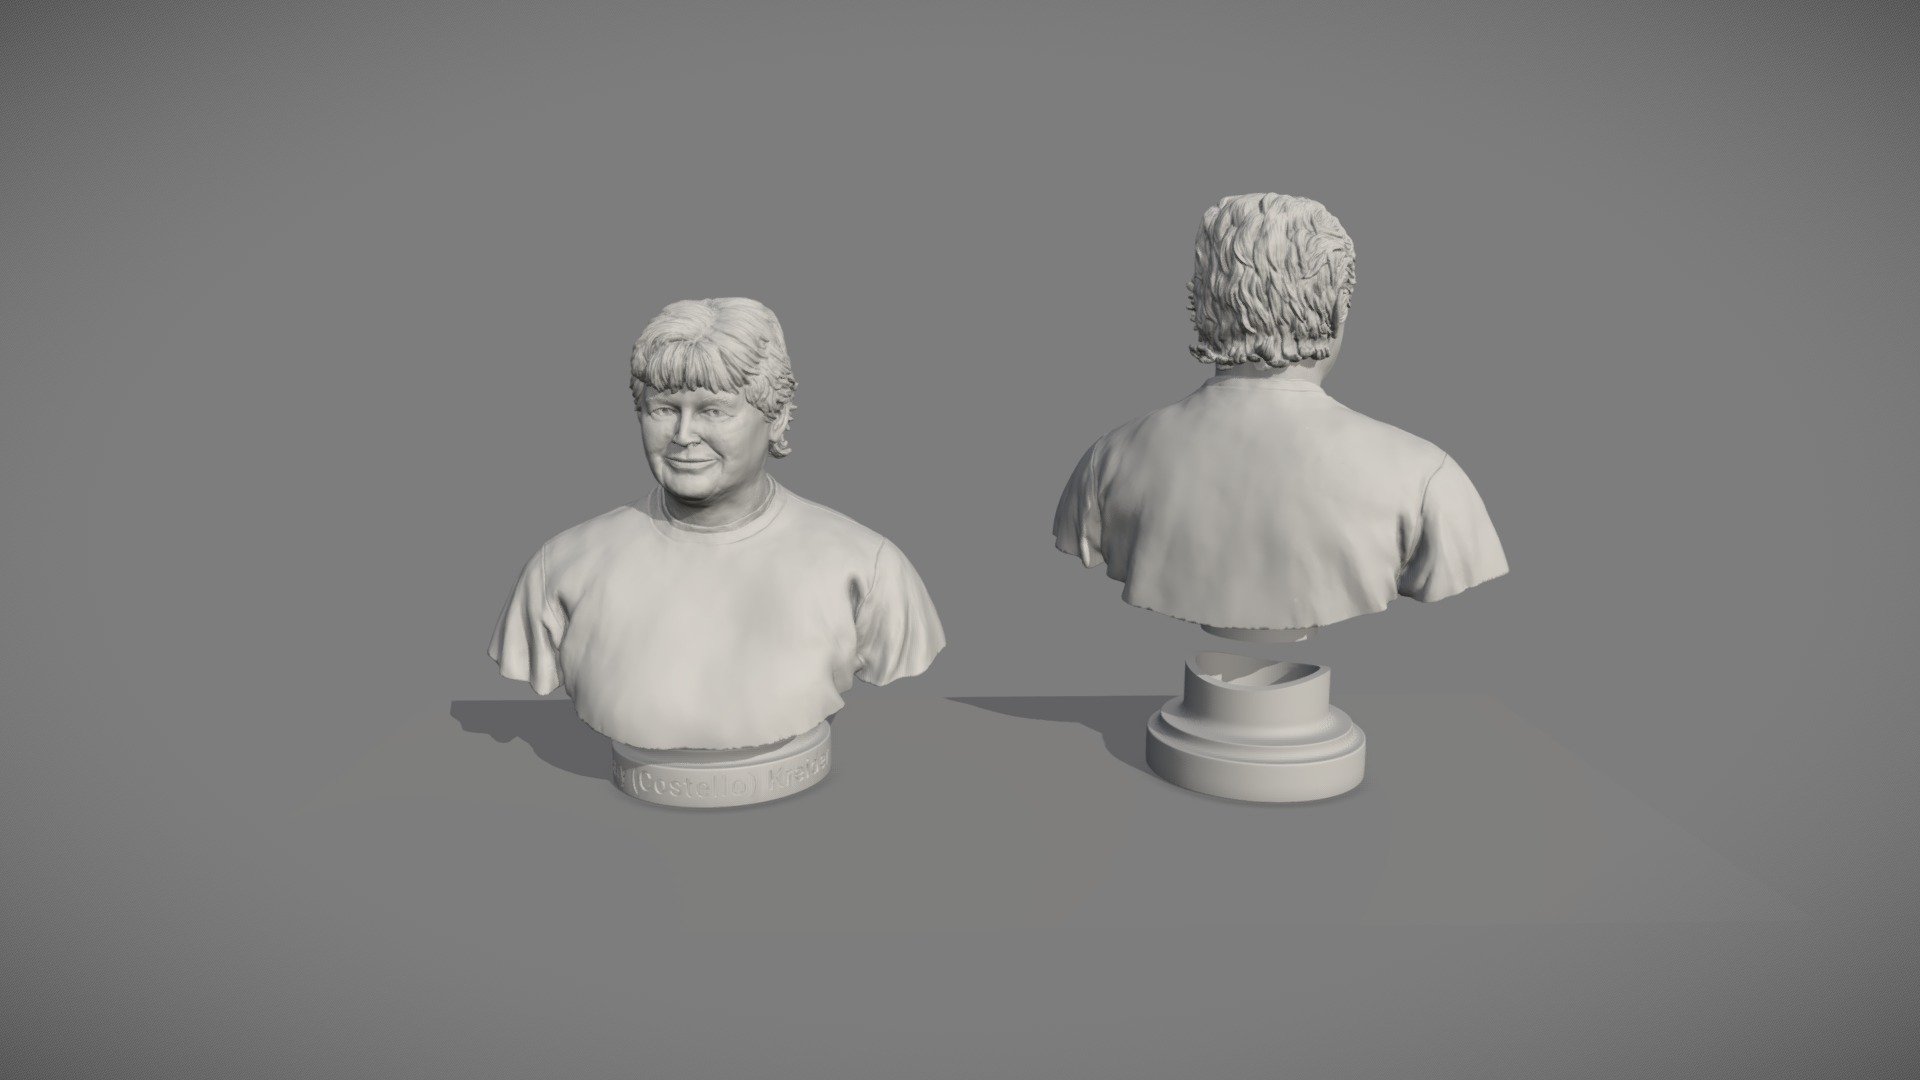 Final Set of Three Busts - Bust Number 3